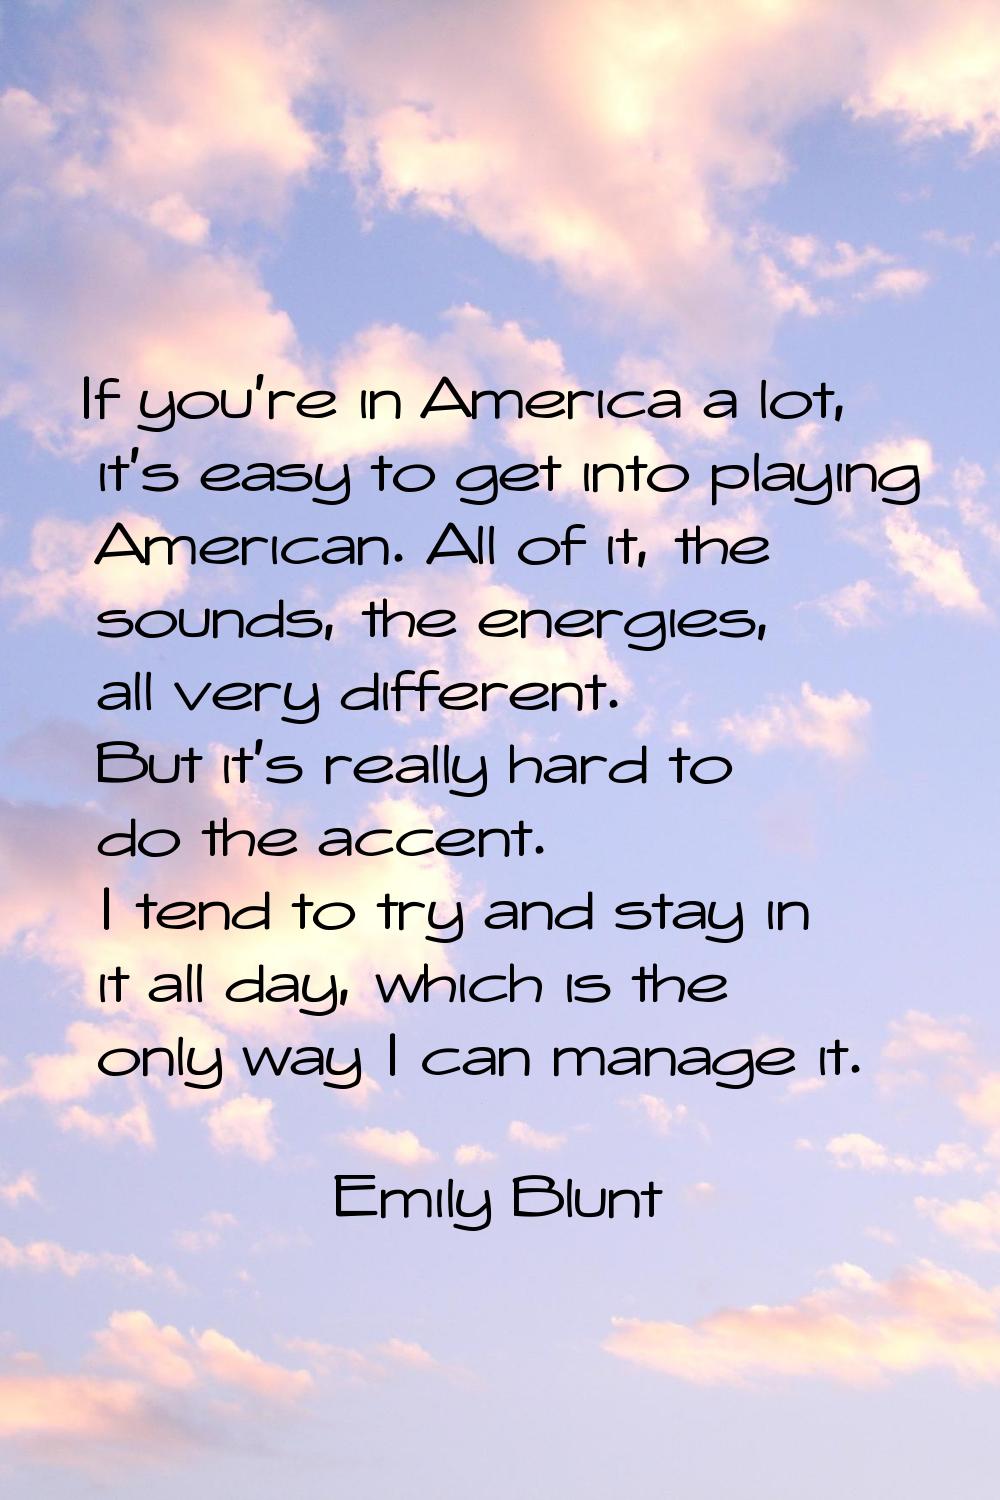 If you're in America a lot, it's easy to get into playing American. All of it, the sounds, the ener